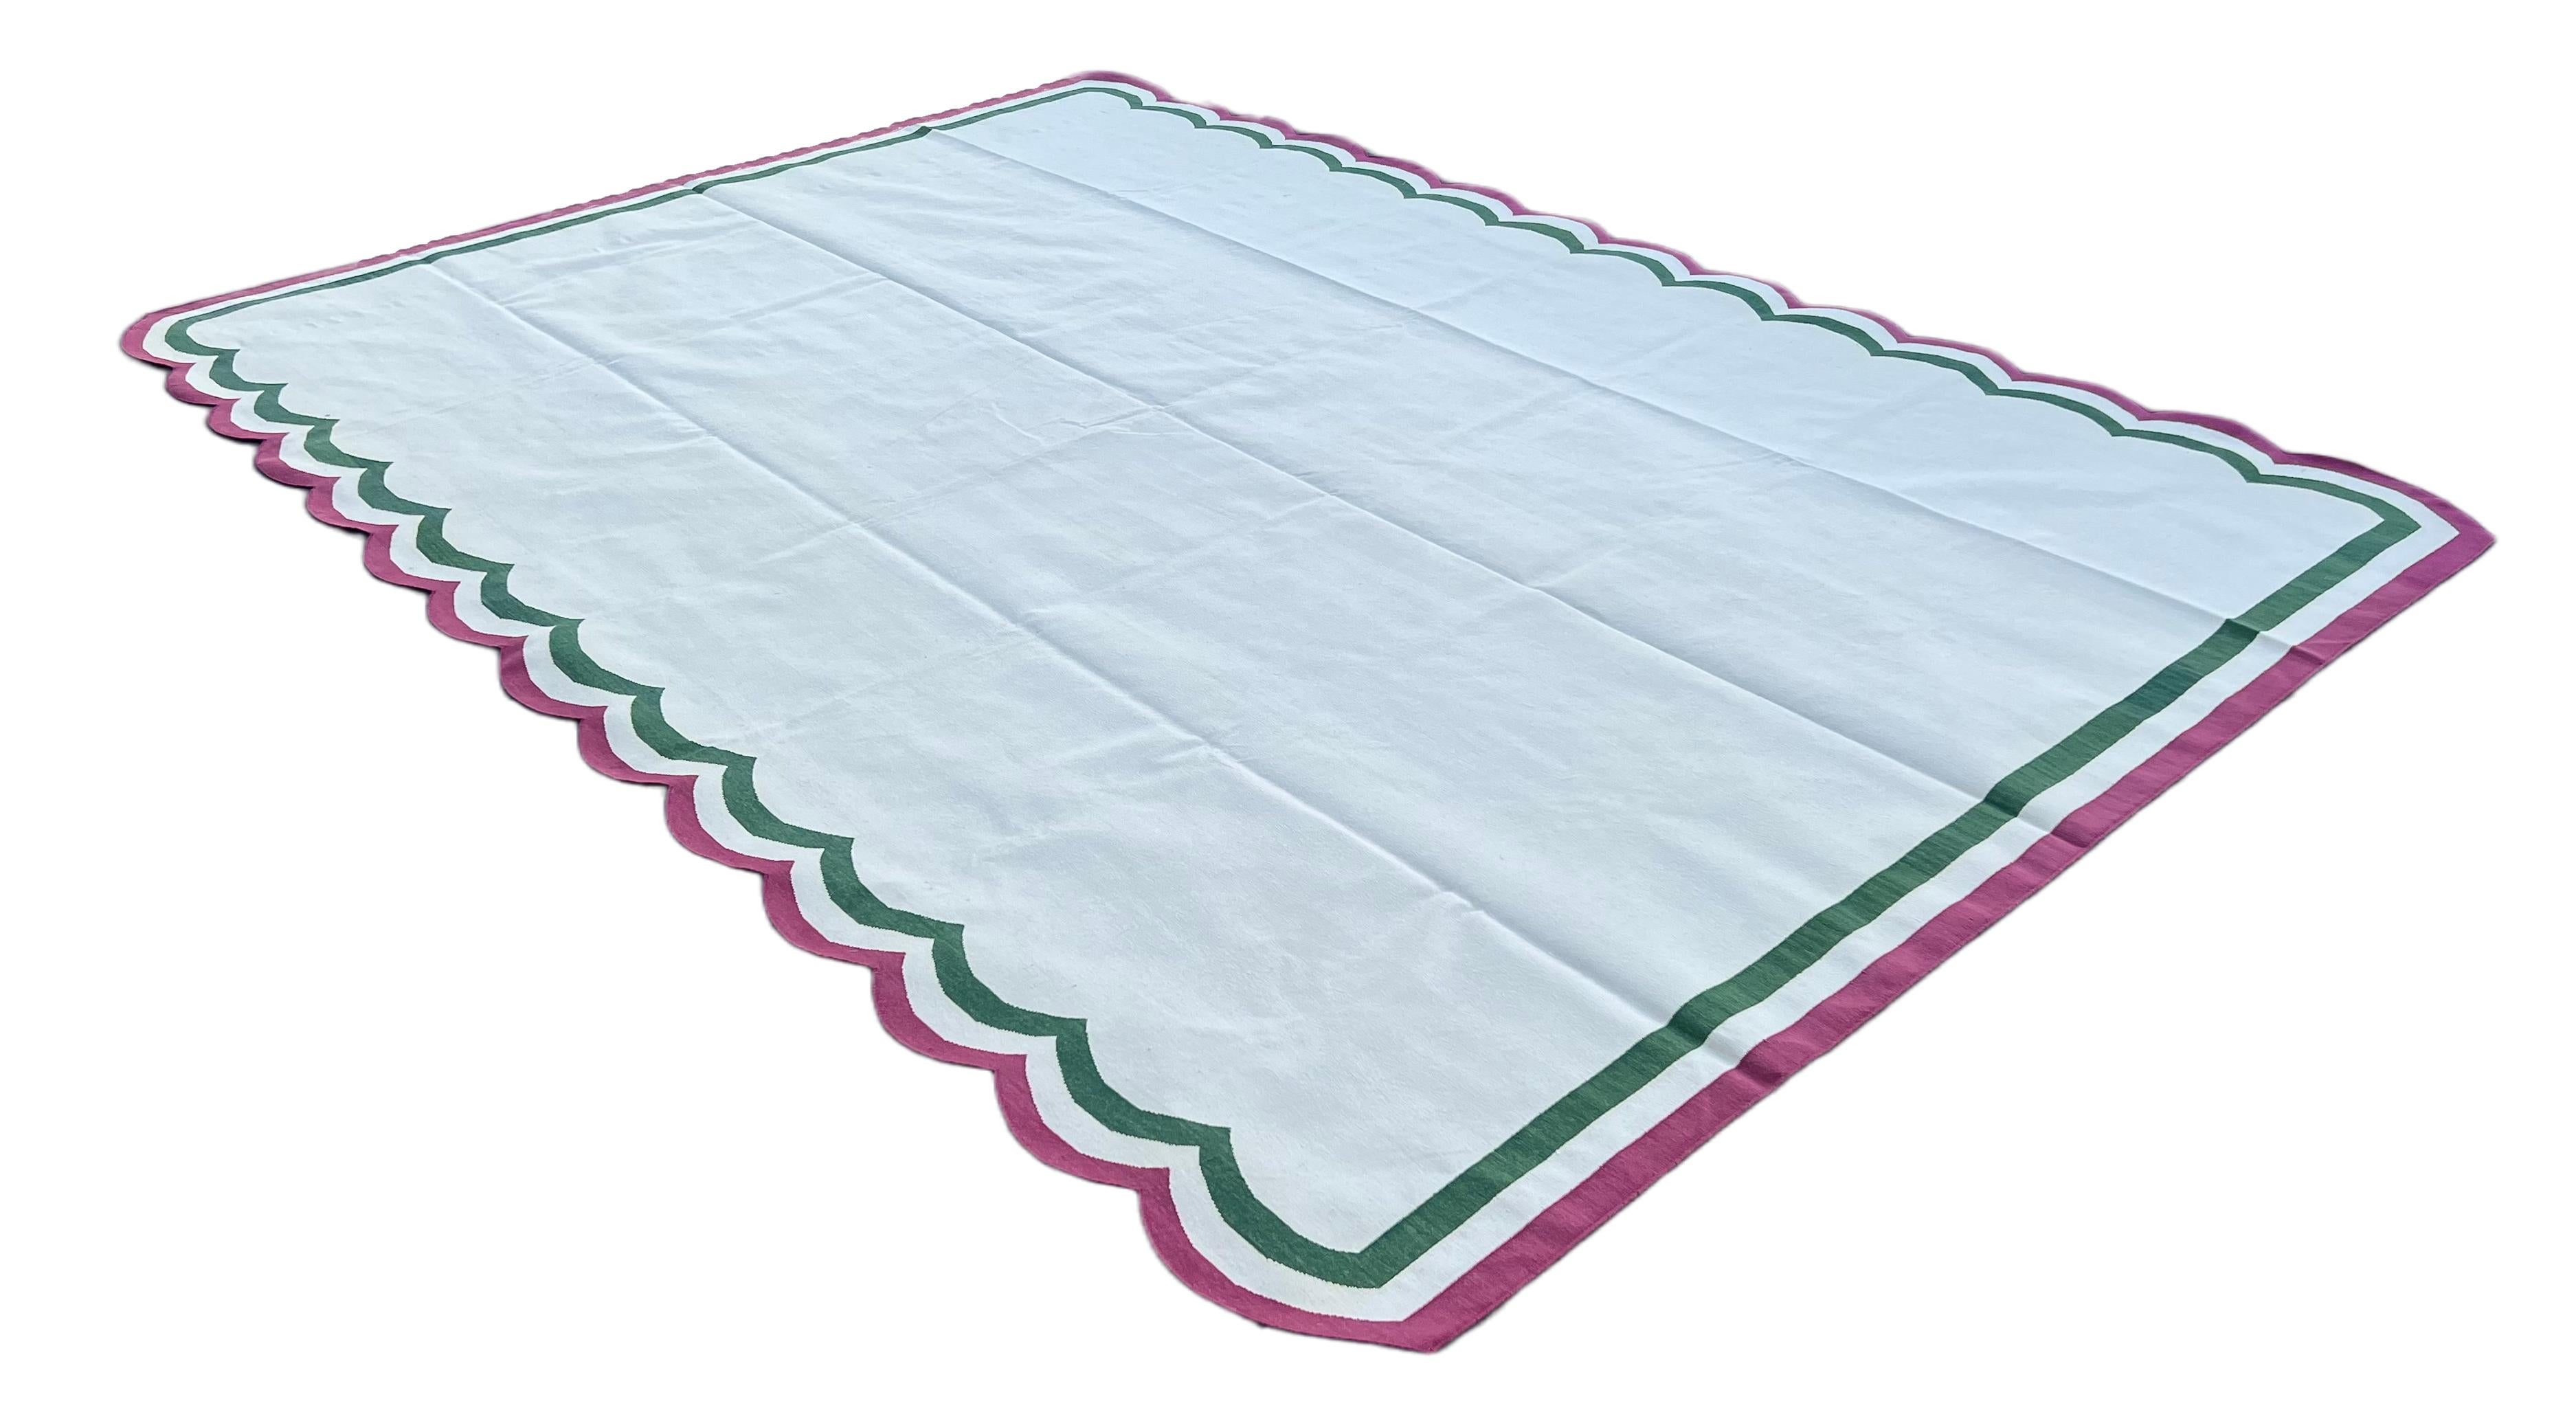 Cotton Vegetable Dyed Reversible Cream, Green And Raspberry Pink Indian Scalloped Rug - 10'x14'
These special flat-weave dhurries are hand-woven with 15 ply 100% cotton yarn. Due to the special manufacturing techniques used to create our rugs, the